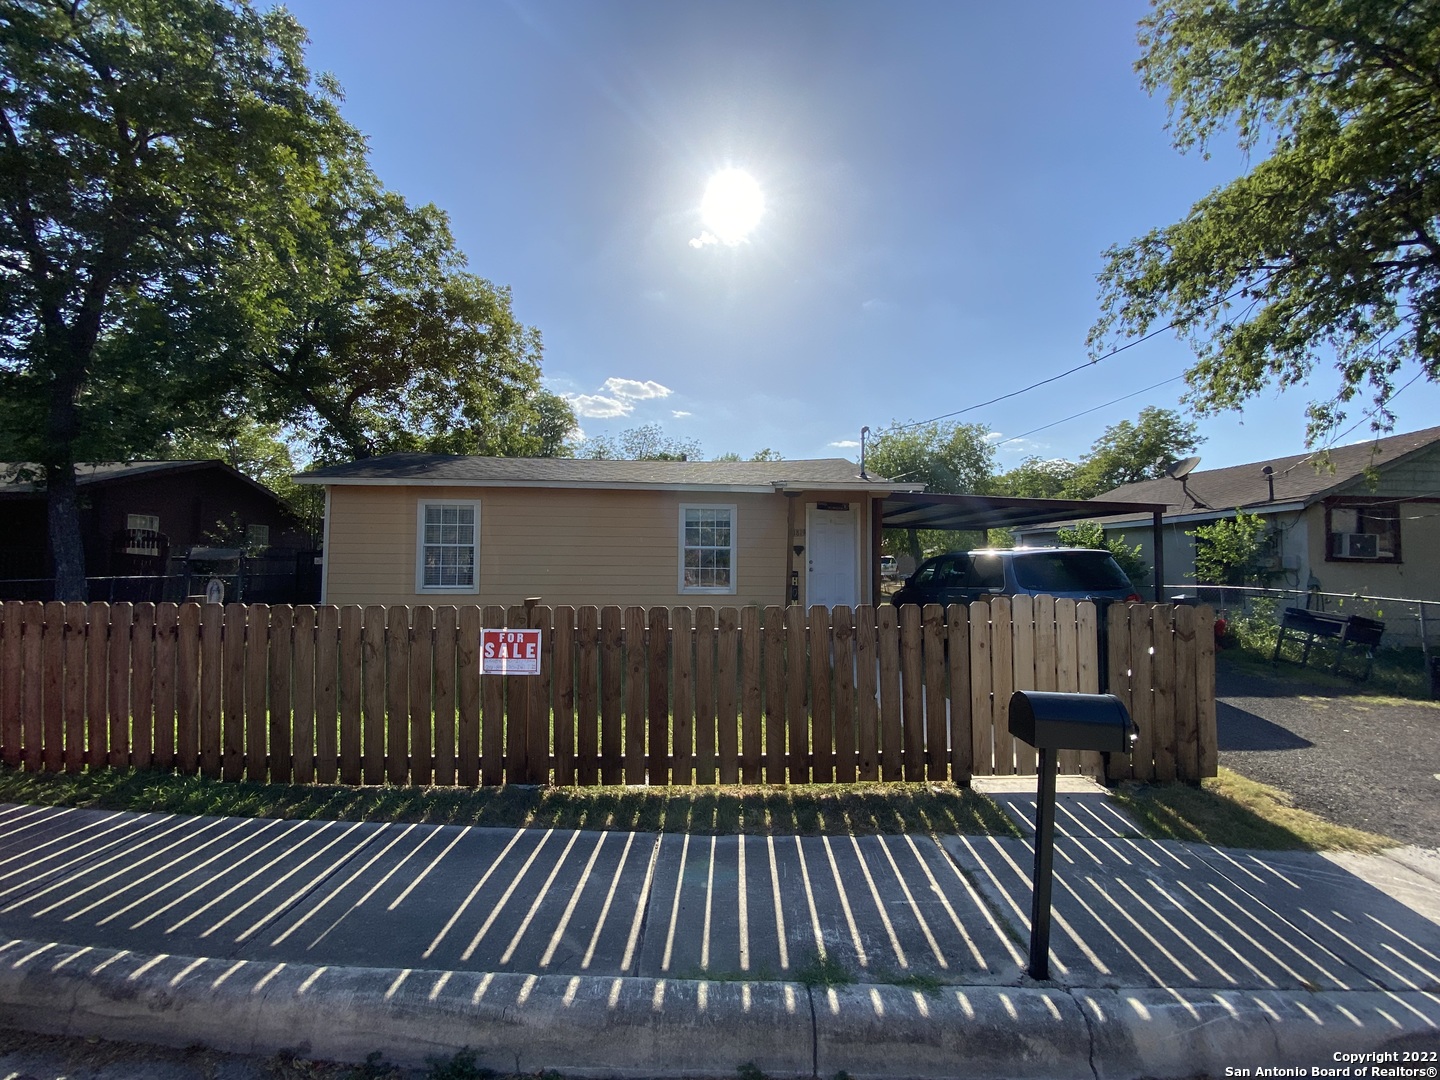 Motivated Sellers!! Beautiful 2 bed 1 bath home with a big lot near the intersection of highway 90 and S General McMullen Dr. Central air and move in ready, must see for yourself! Just a few minutes from downtown and easy highway access, come see the home before its gone!